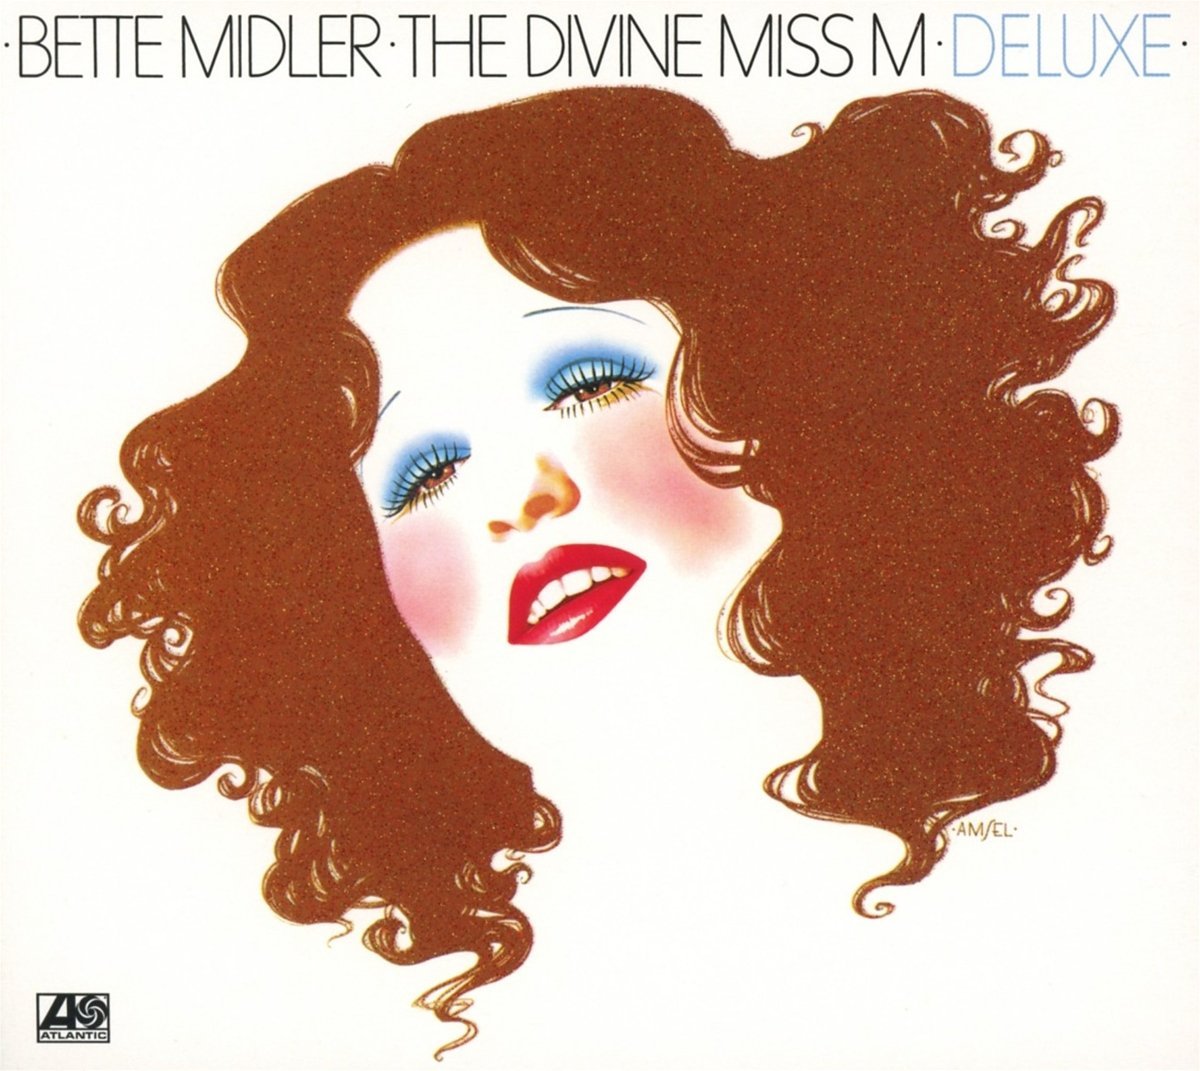 The Divine Miss M - Deluxe Edition | Soundtrack - Bette Midler